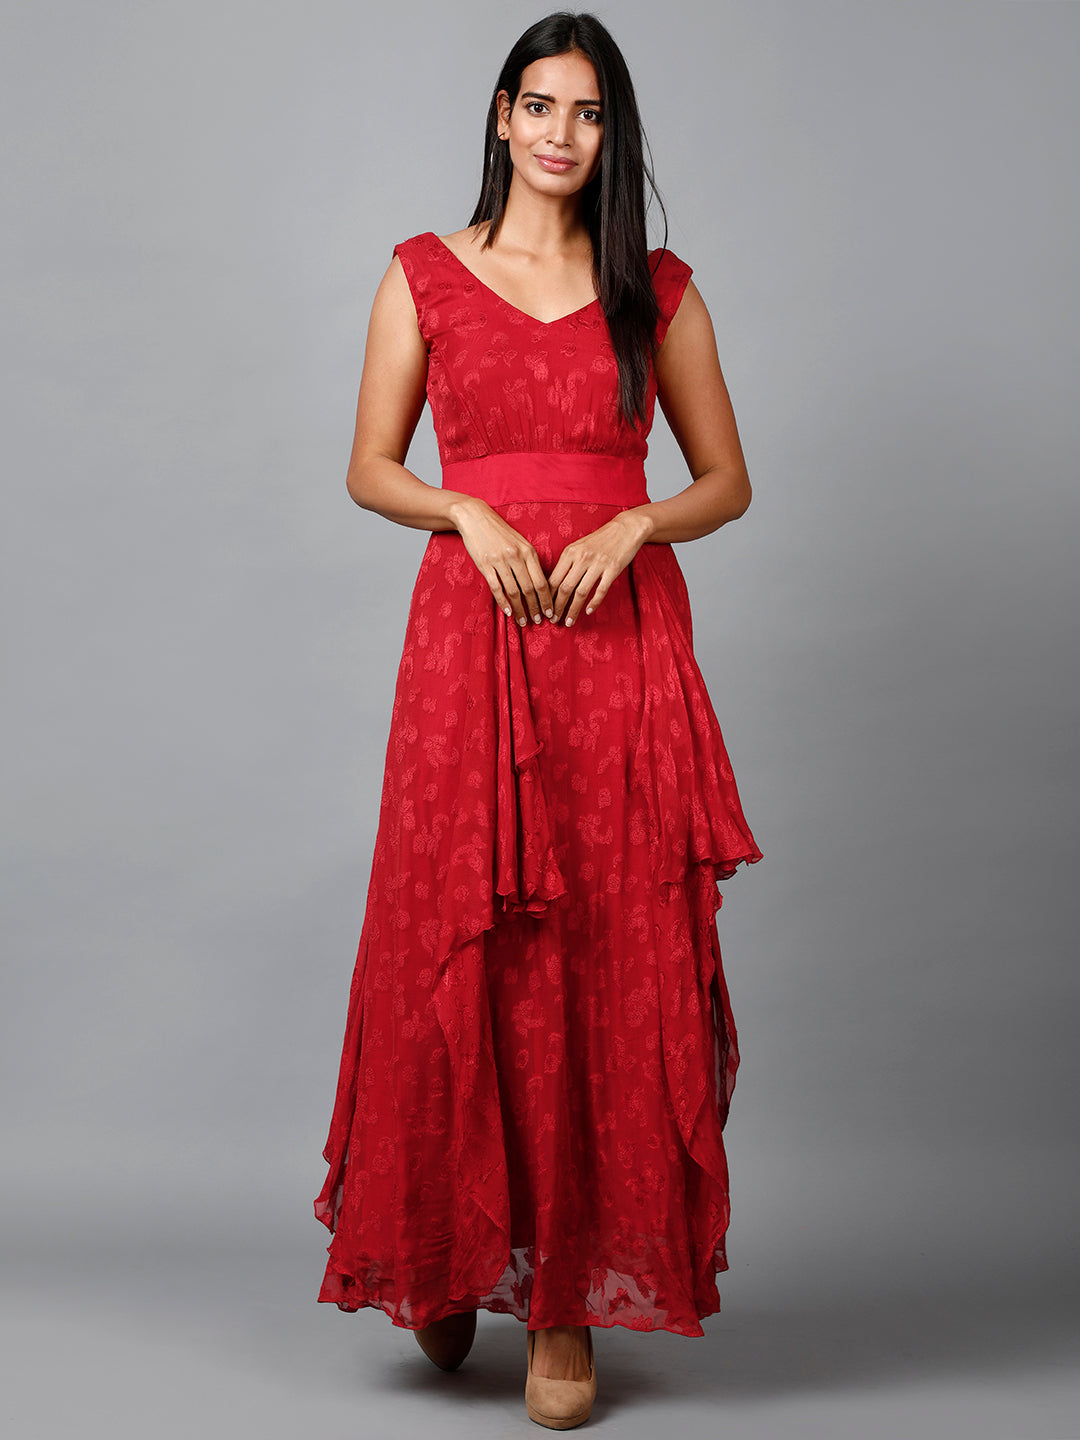 Women's Red Floral Self Design Georgette Dress - MIRACOLOS by Ruchi